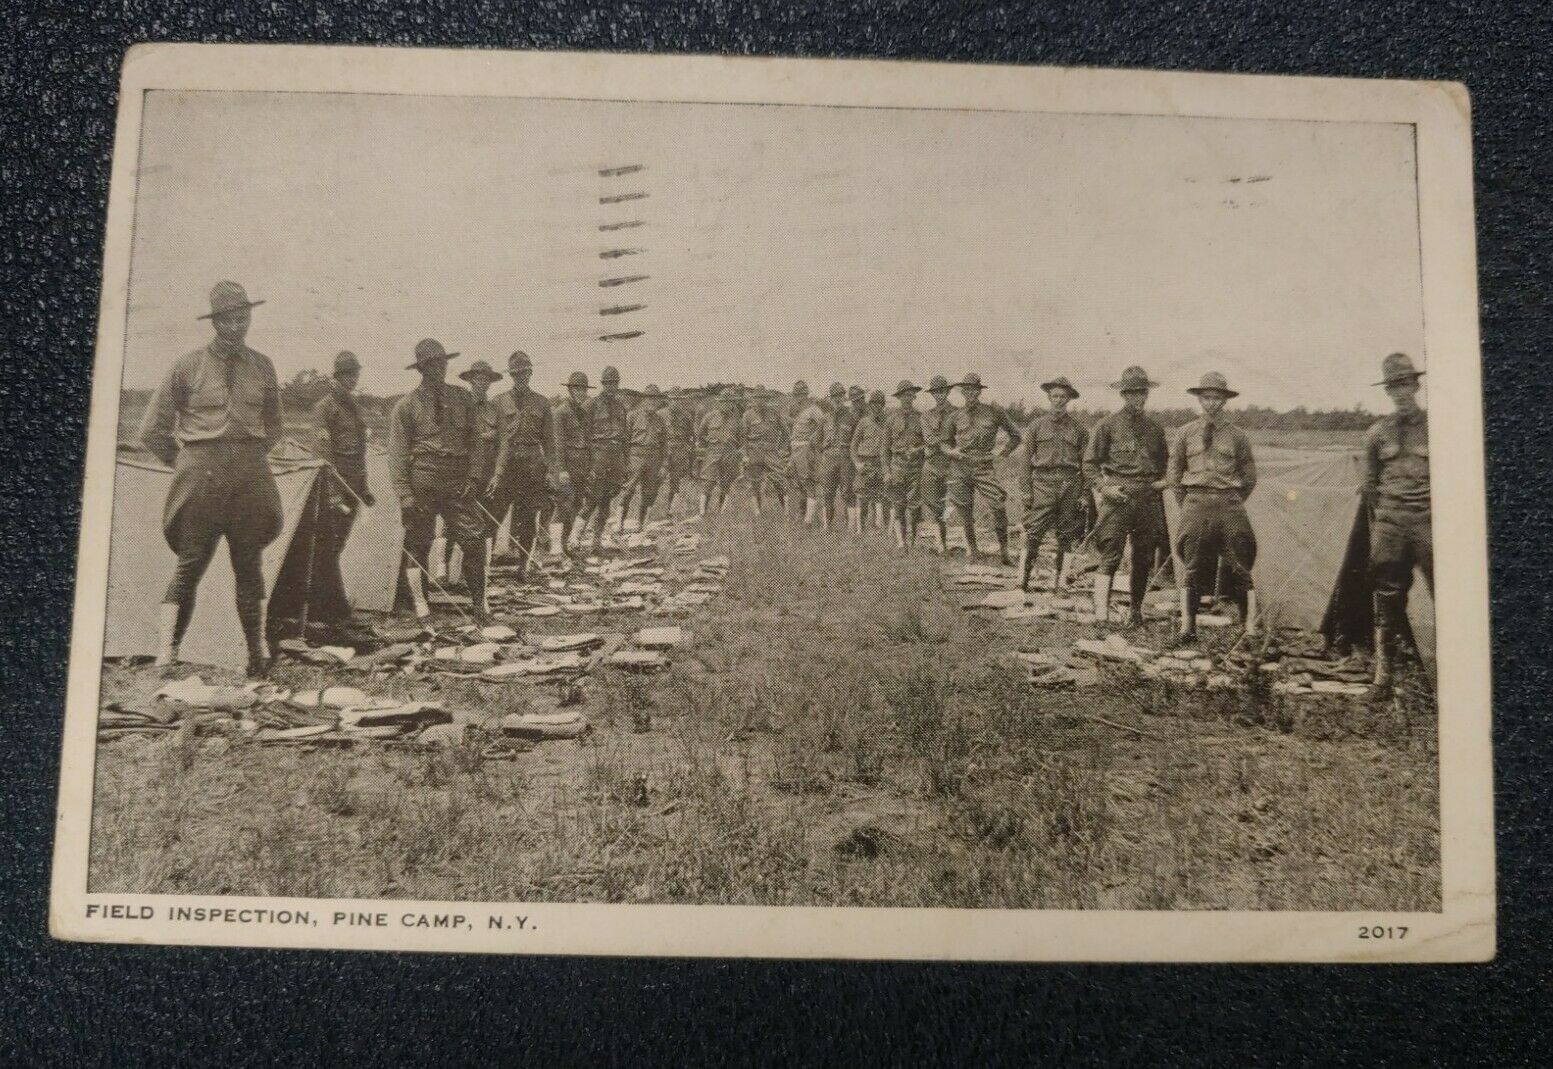 Antique Post Card - Ww1 Military Photo Soldiers - Field Inspection Pine Camp